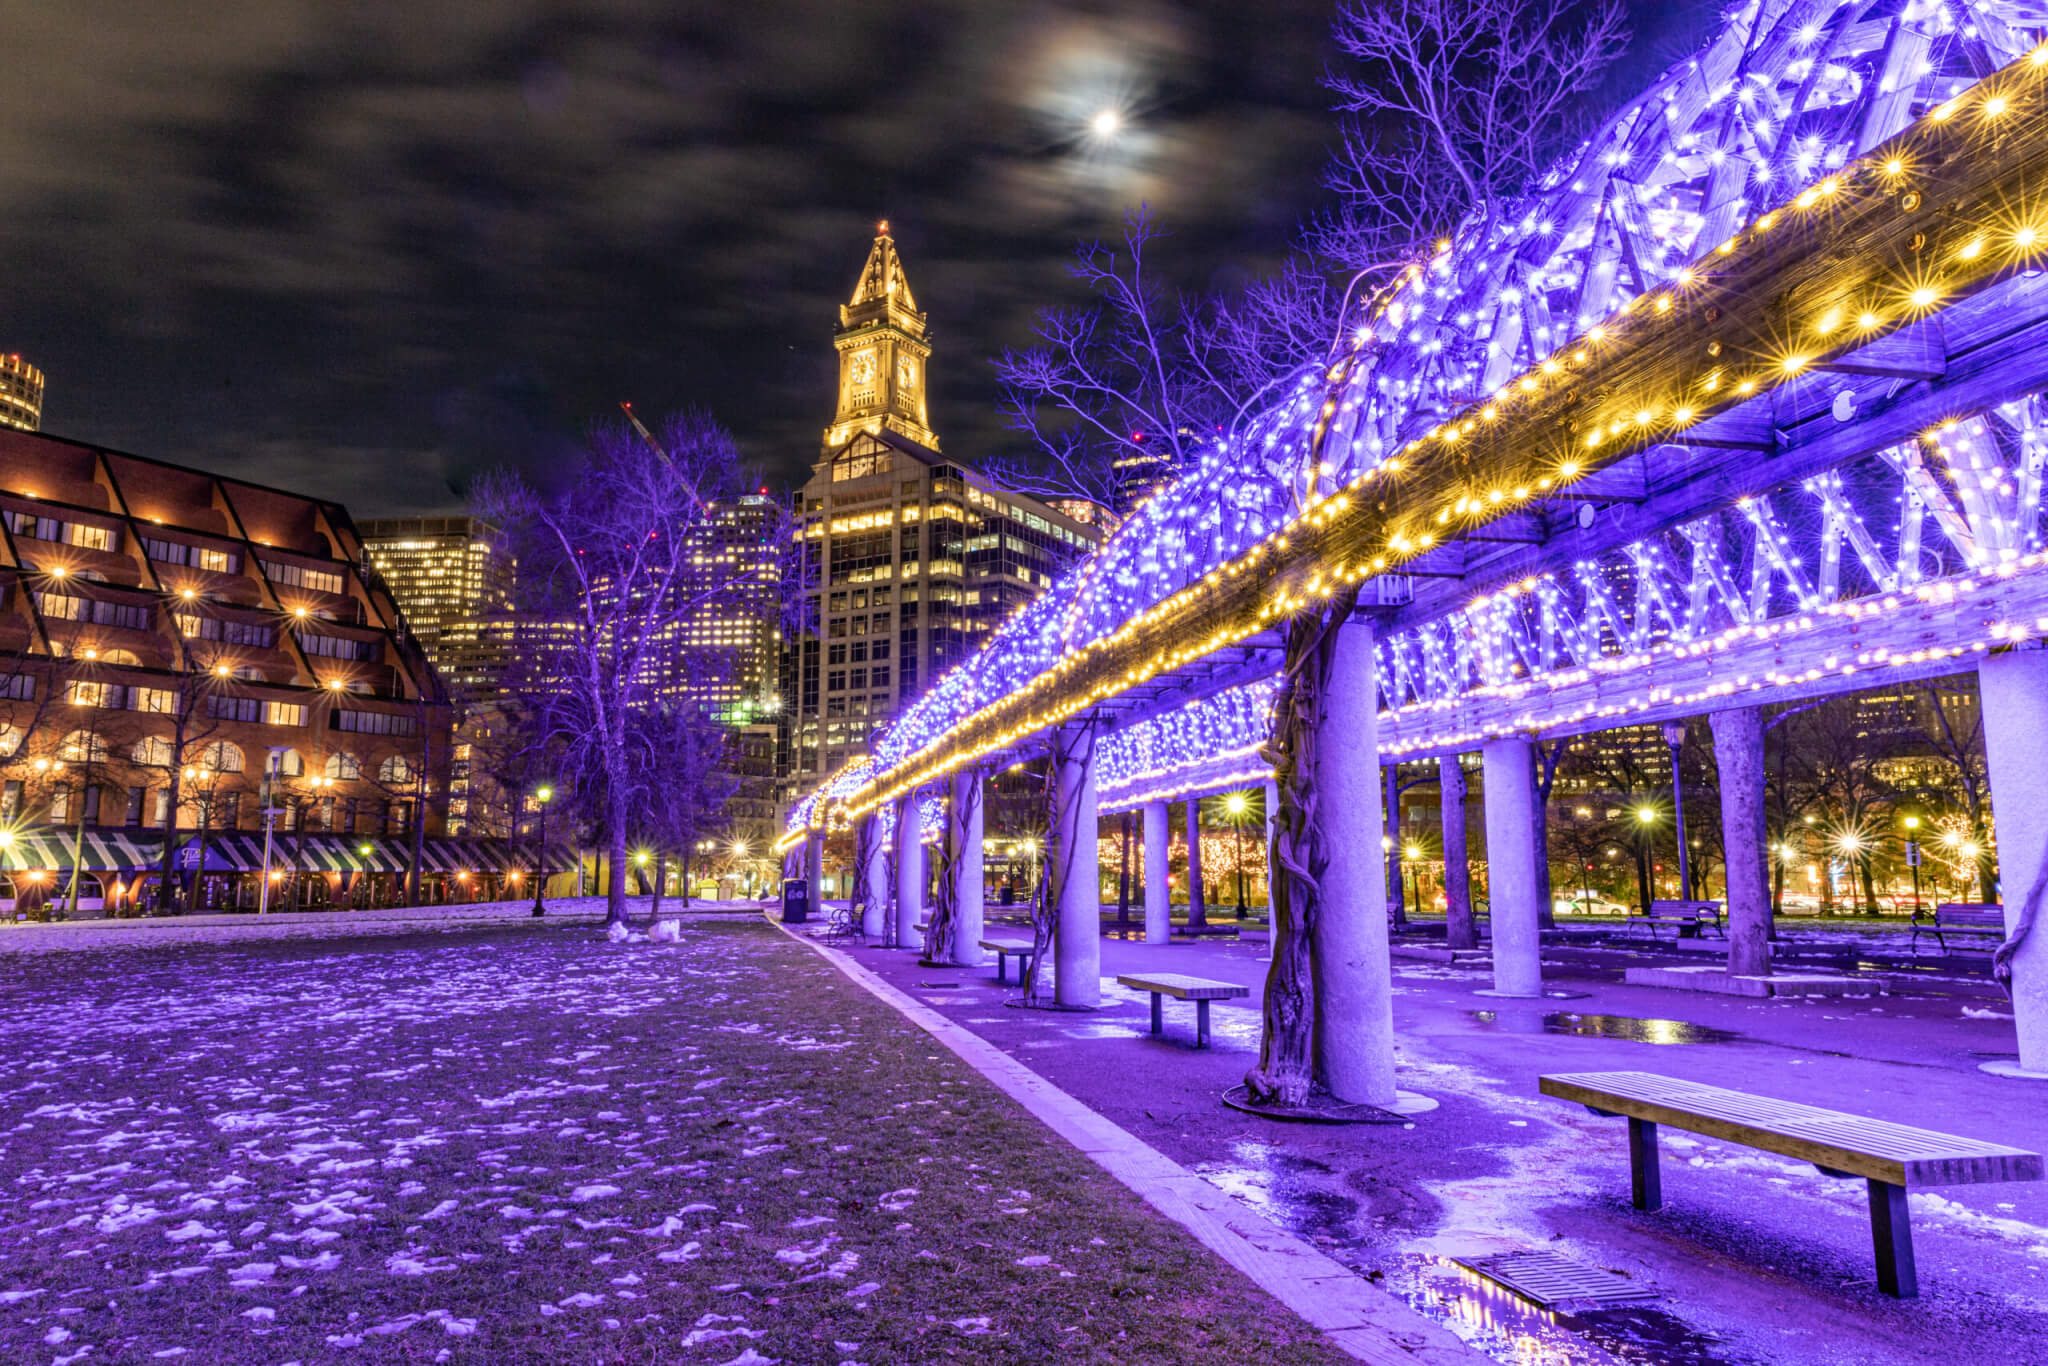 Festive park sparkling with lights at night with the moon above.